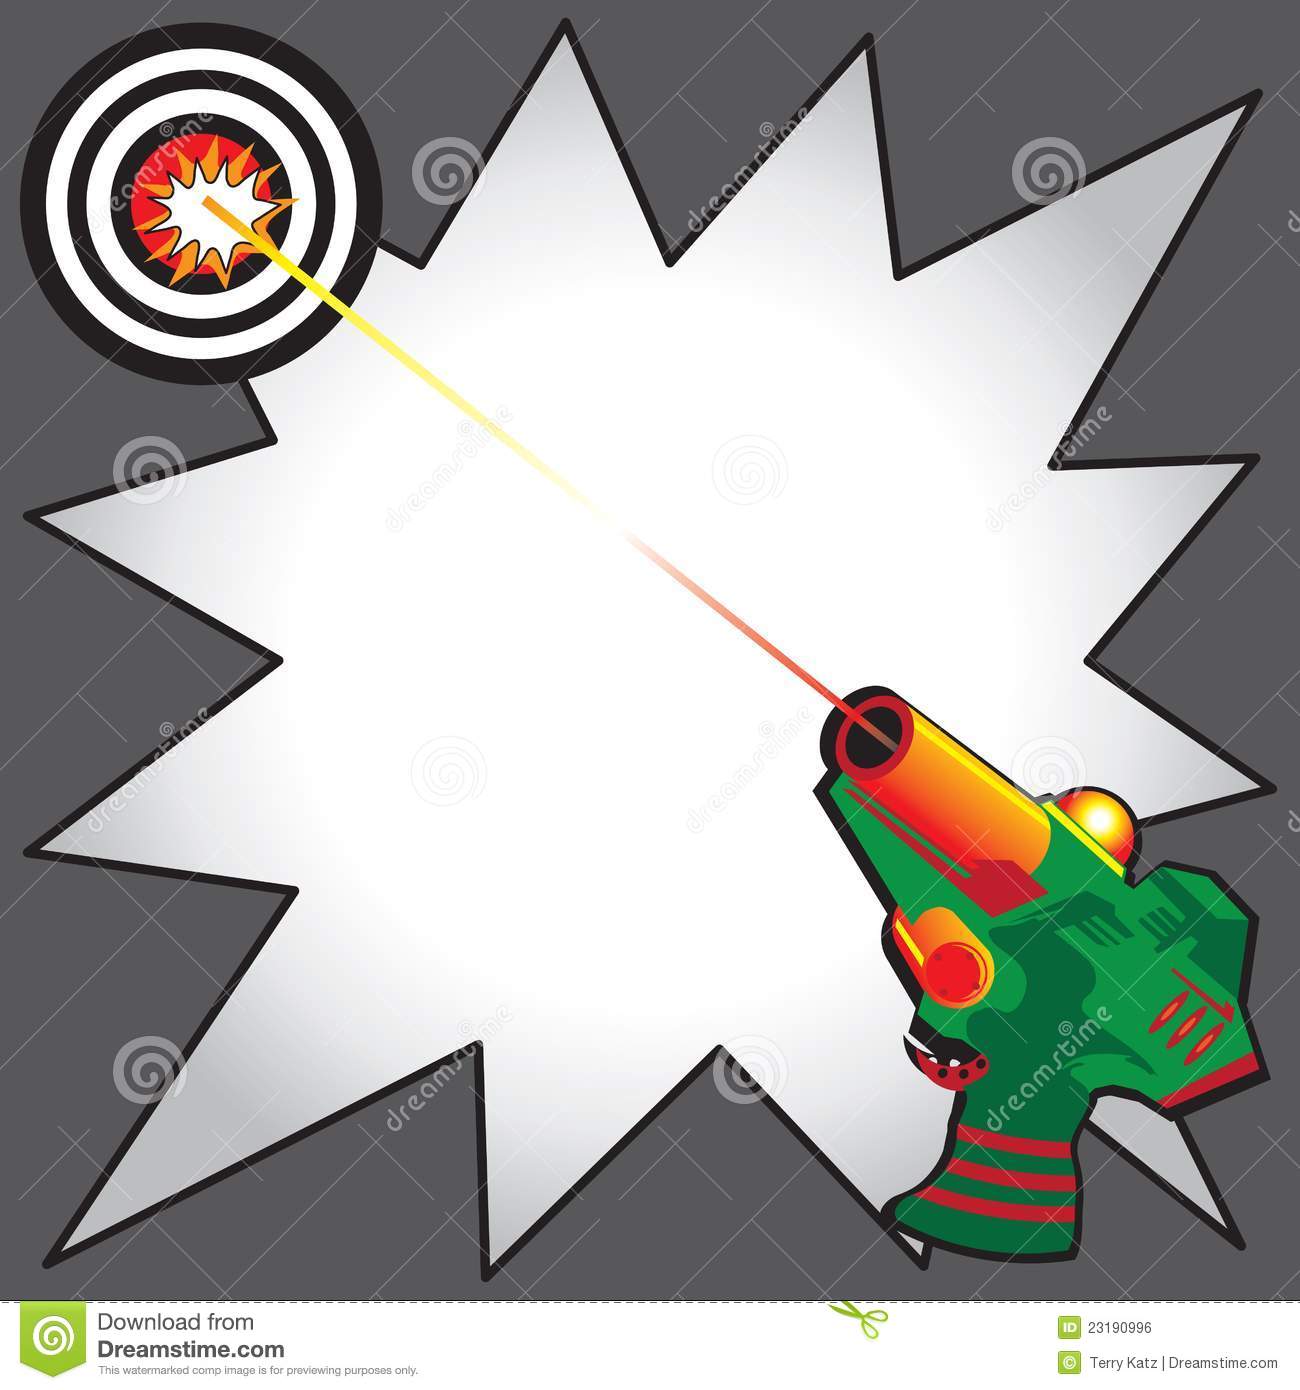 Laser Tag Clipart Free.